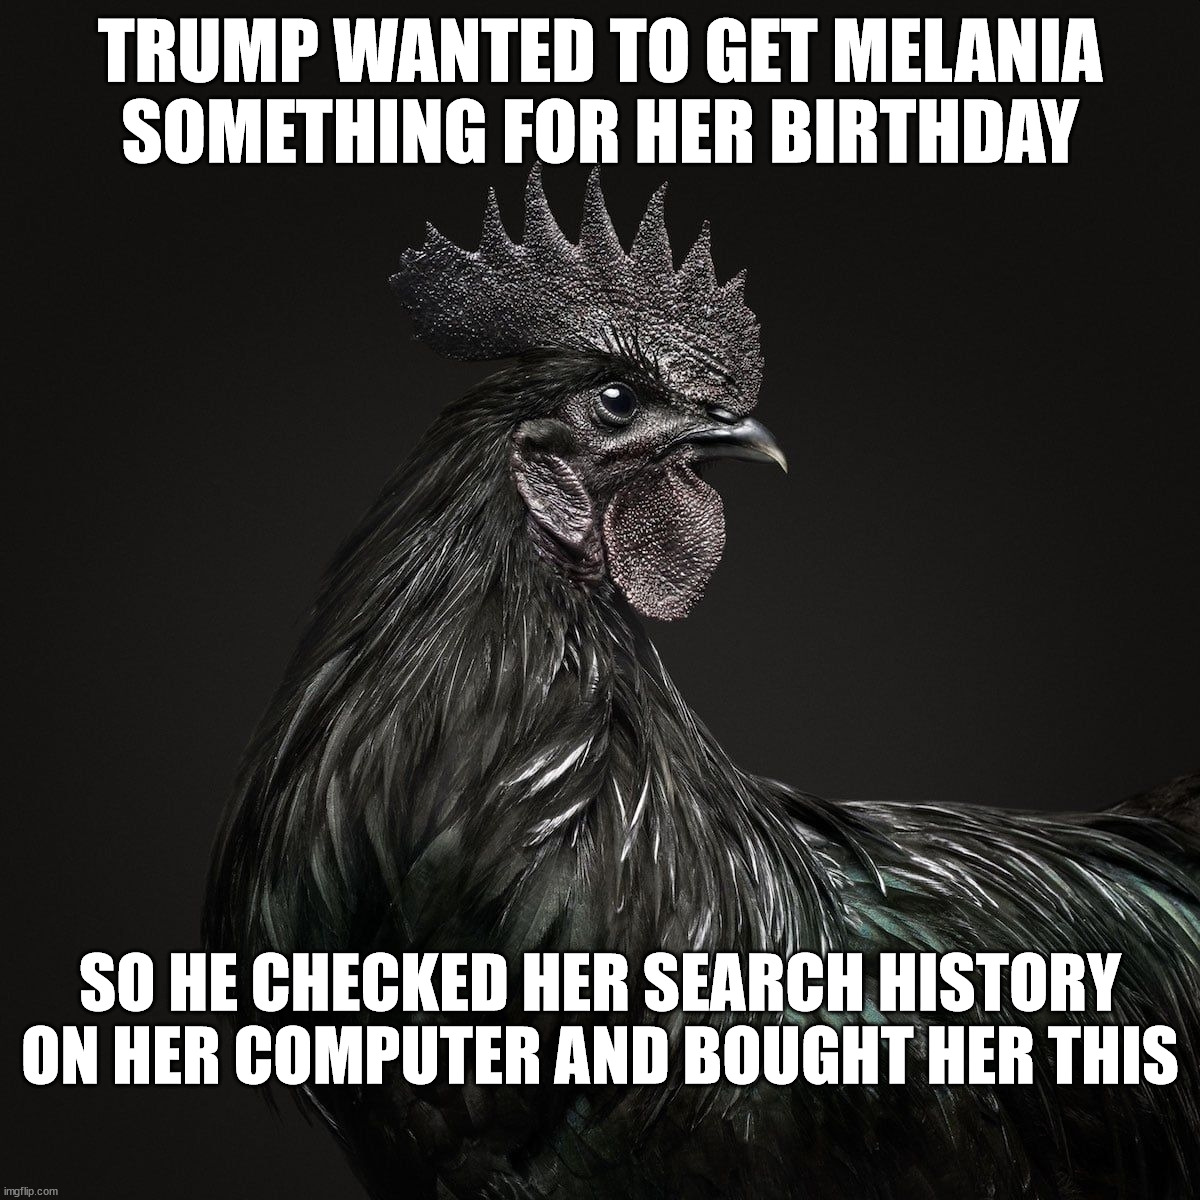 Melania Birthday Present | TRUMP WANTED TO GET MELANIA SOMETHING FOR HER BIRTHDAY; SO HE CHECKED HER SEARCH HISTORY ON HER COMPUTER AND BOUGHT HER THIS | image tagged in black rooster,melania birthday present,trump sucks | made w/ Imgflip meme maker